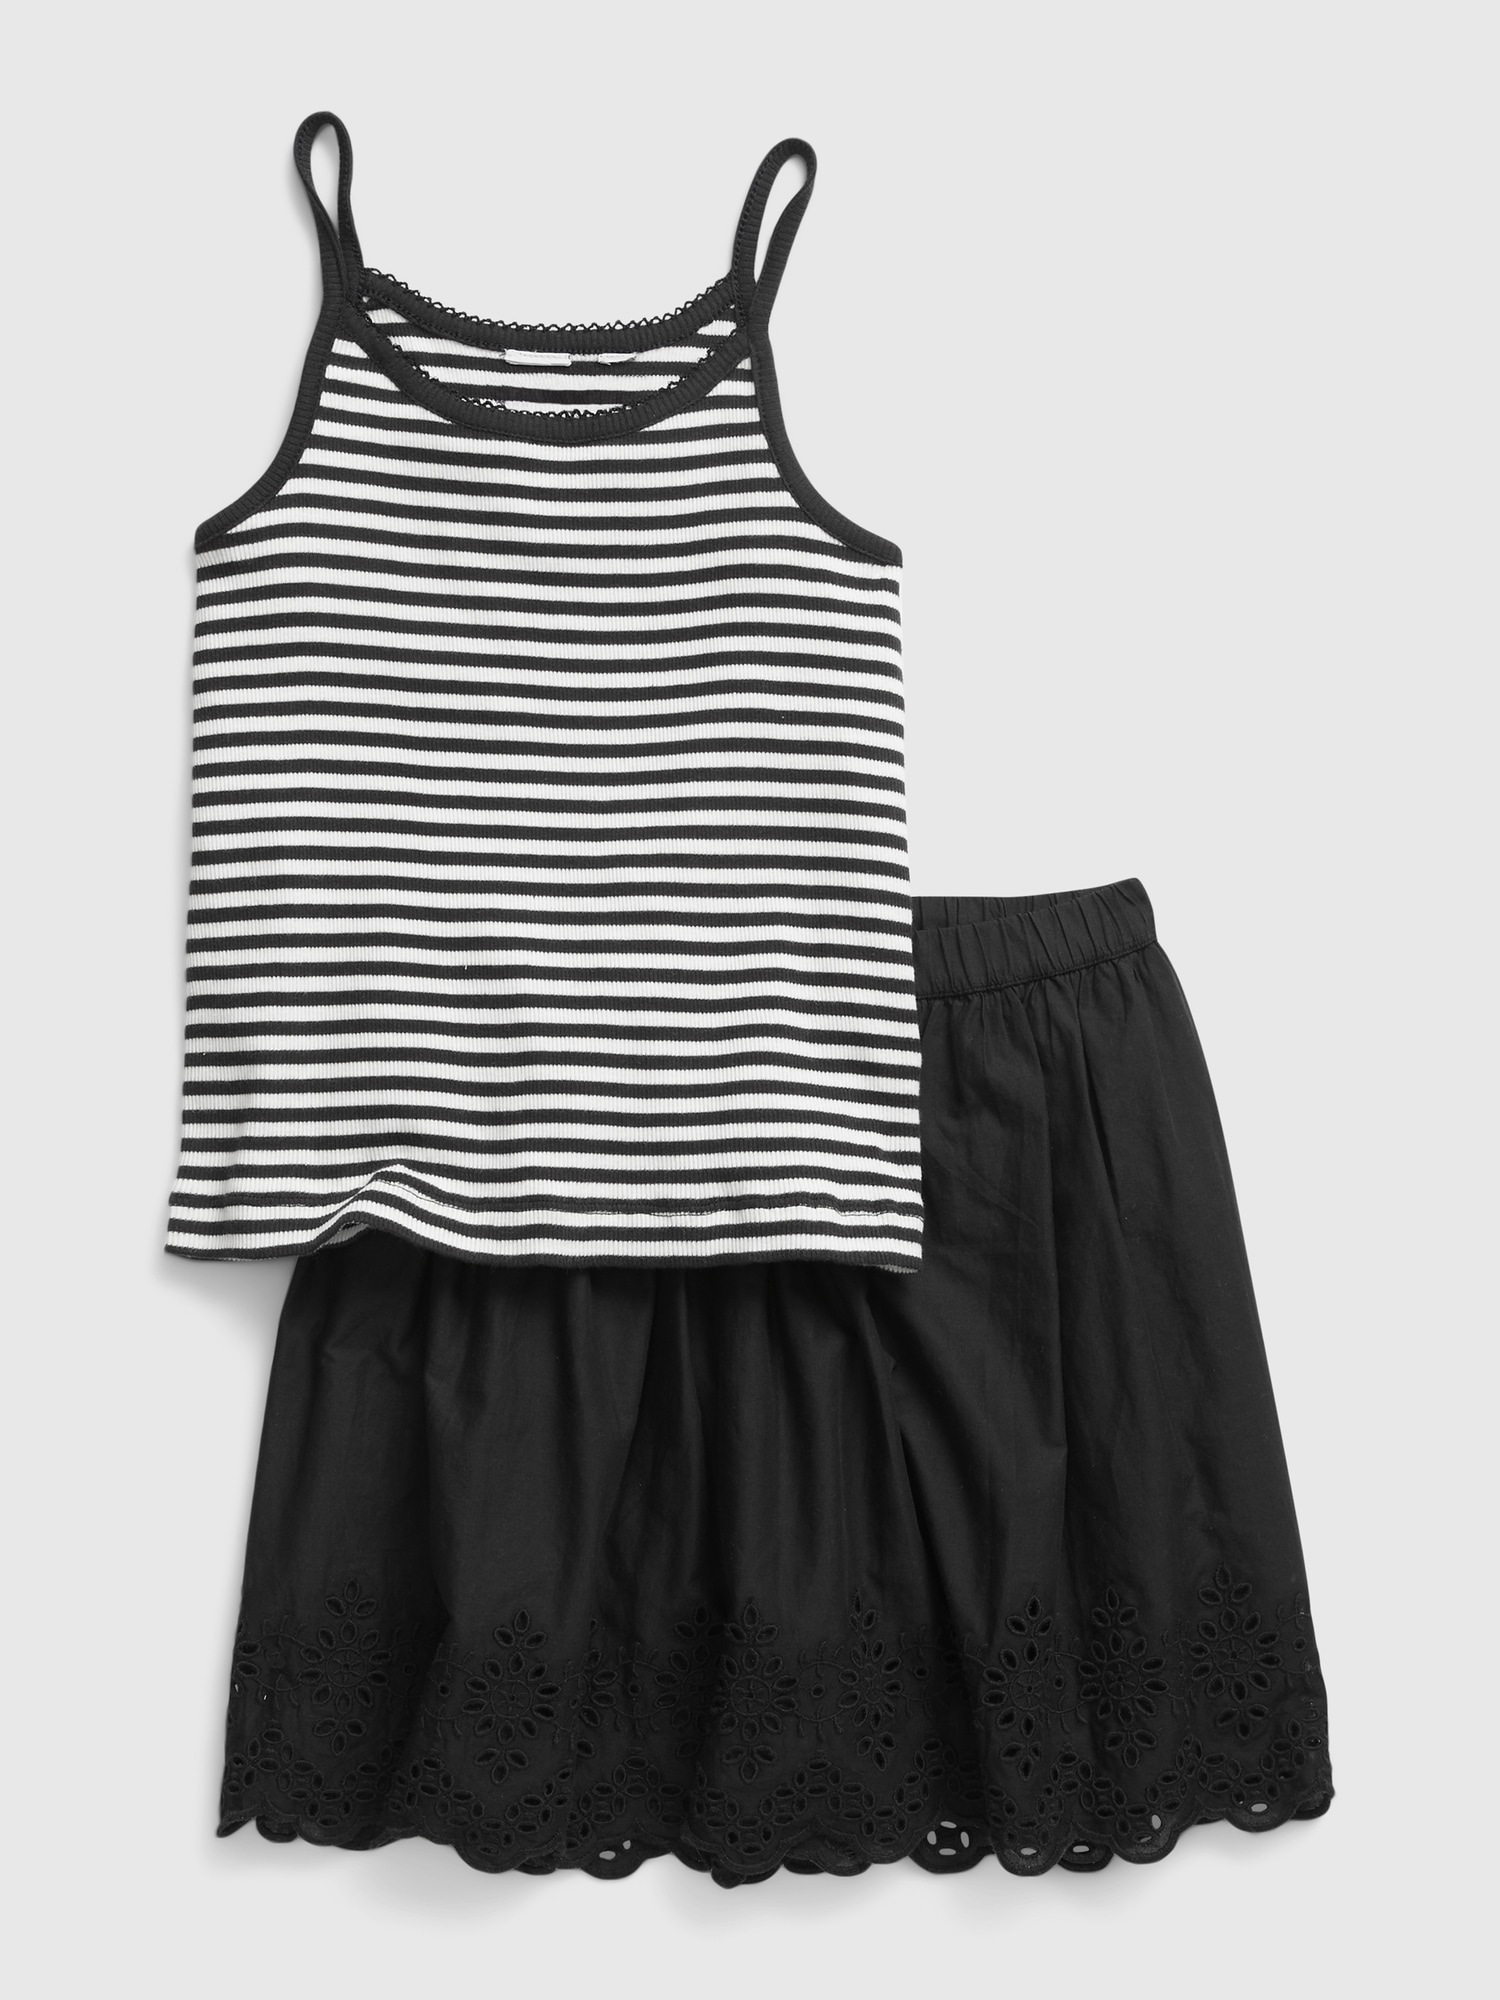 Gap Kids Cami and Skirt Outfit Set